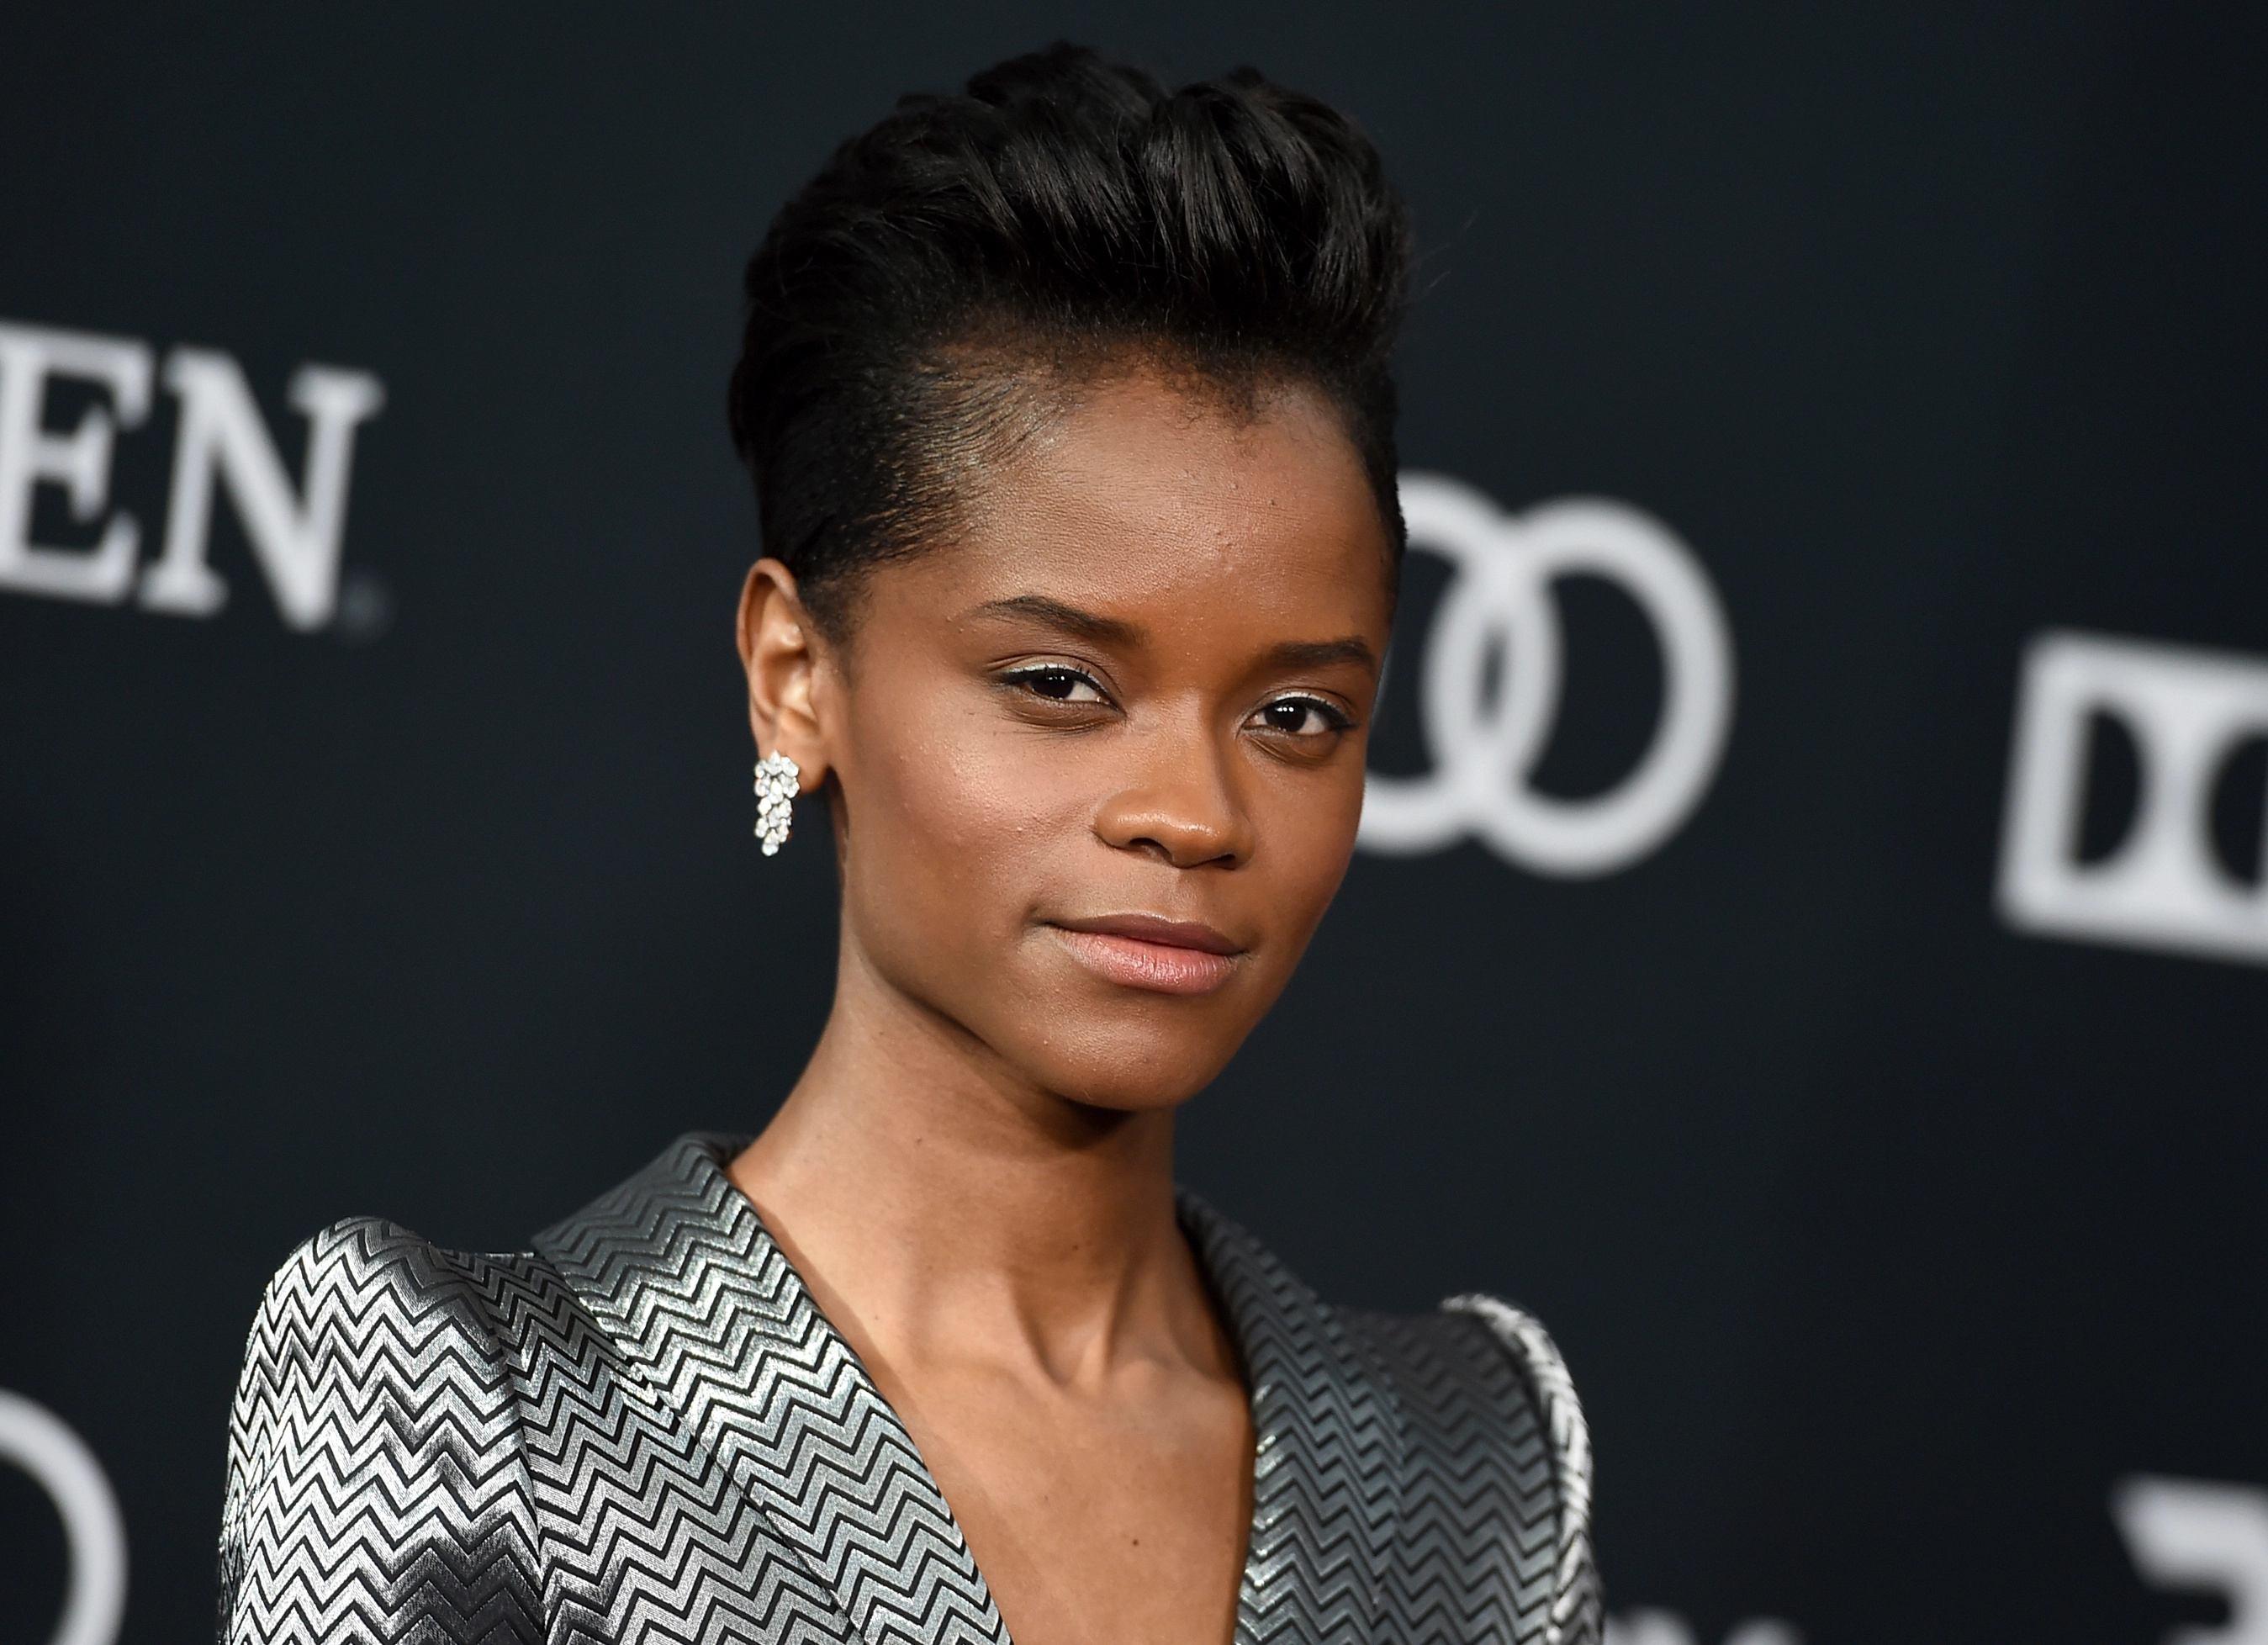 Letitia Wright Wallpapers (23+ images inside)